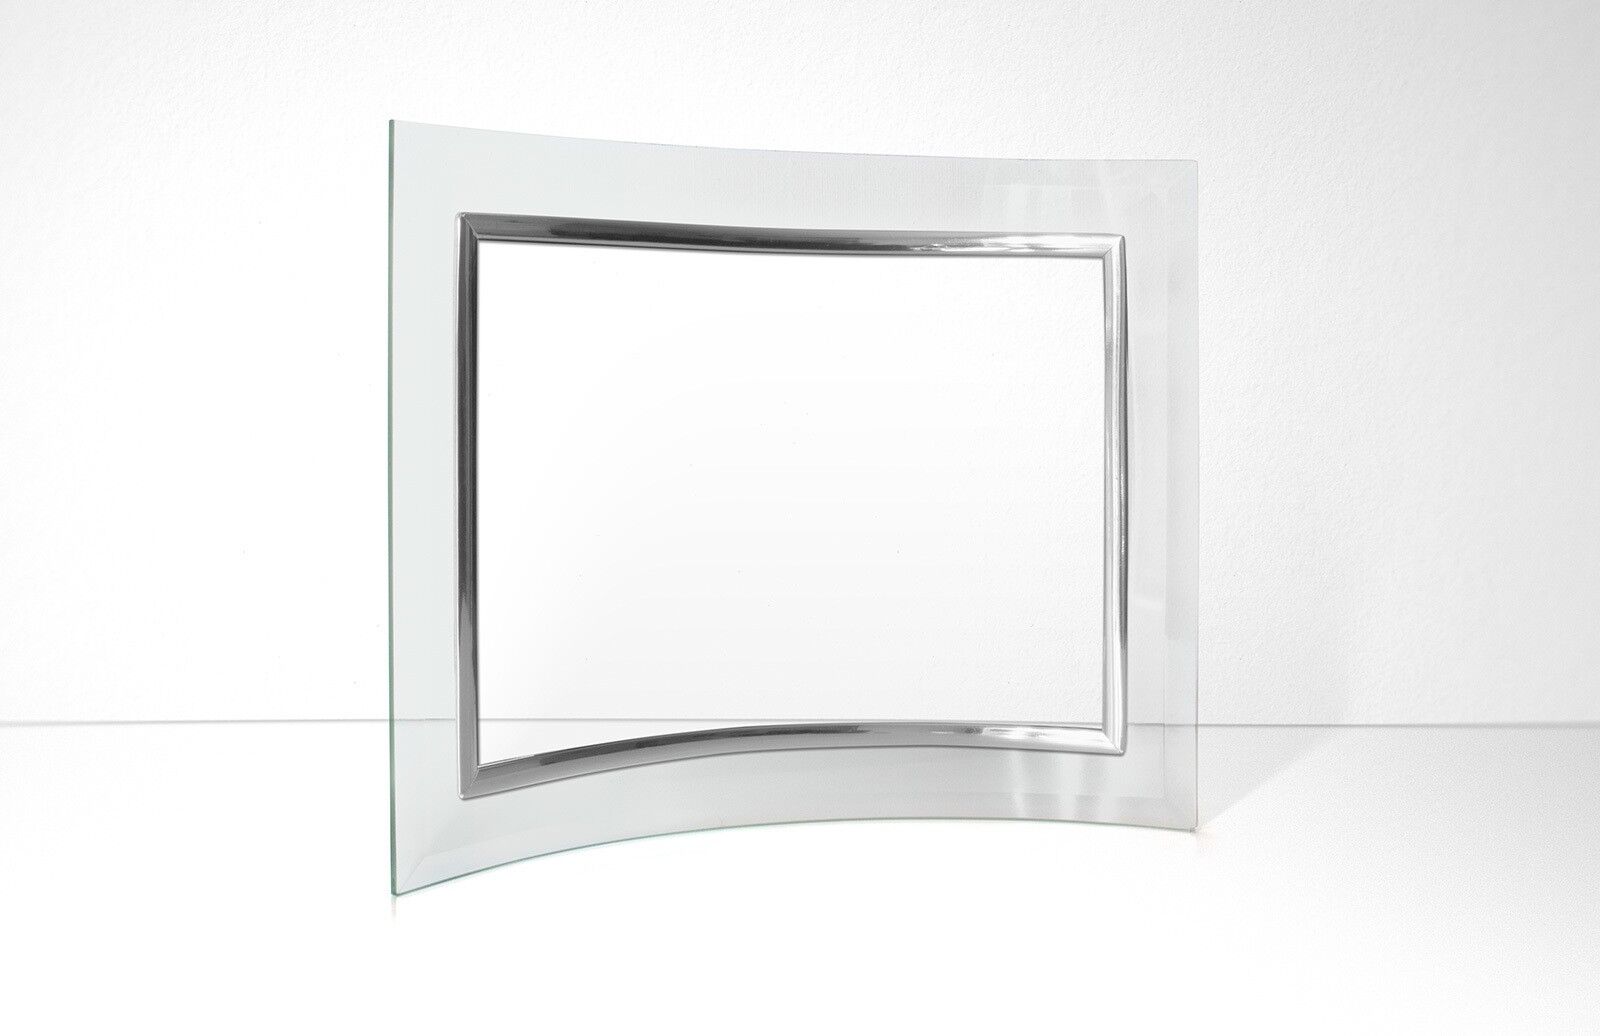 Curved Glass Photo Frame Mockup with Simple Background FREE PSD